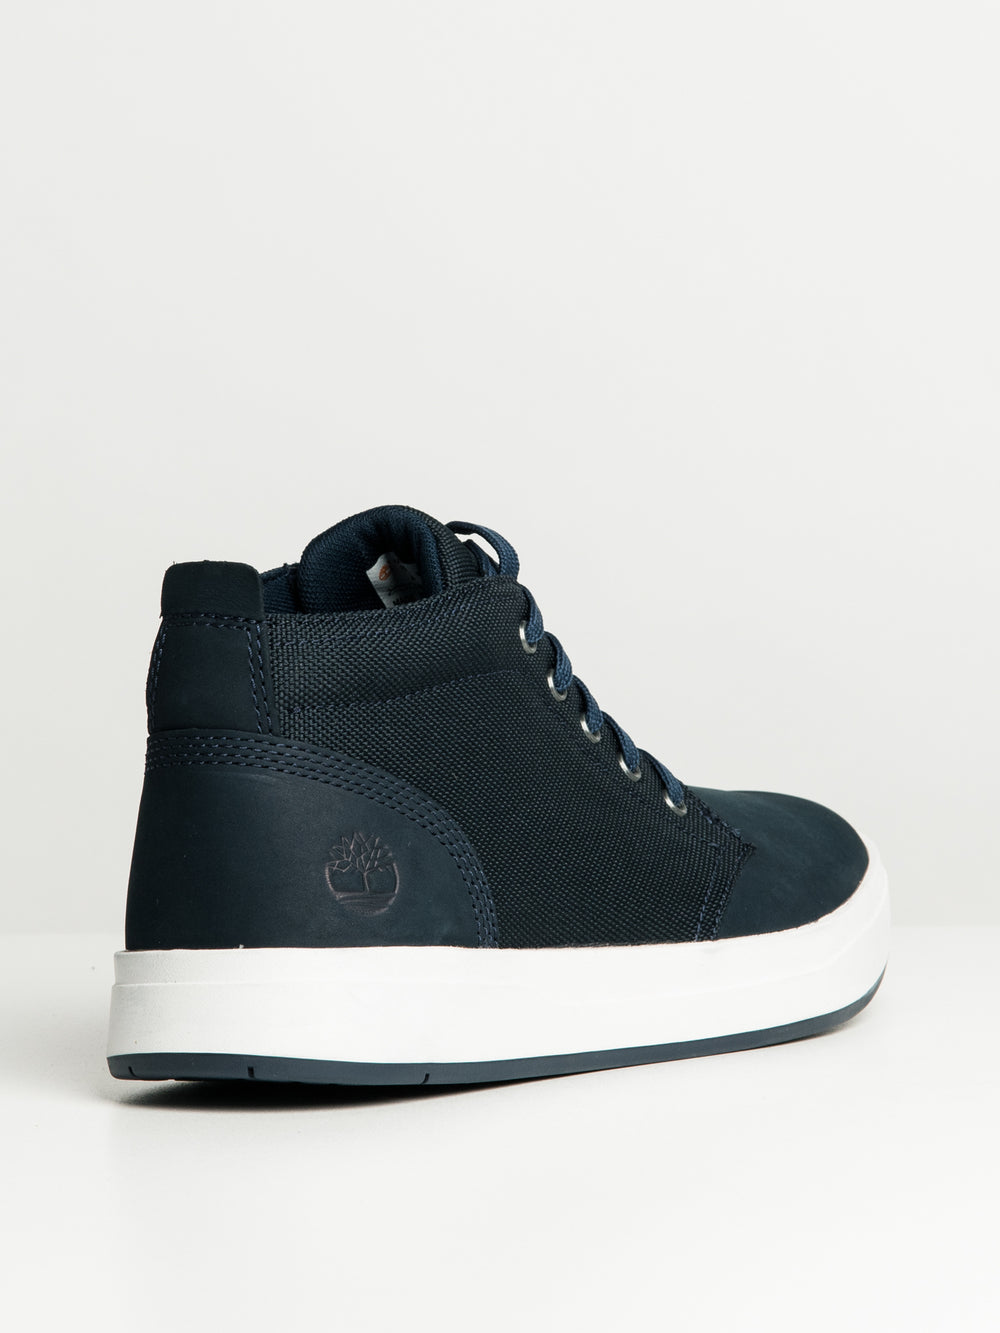 MENS TIMBERLAND DAVIS SQUARE LEATHER & FABRIC CHUKKA BOOT - CLEARANCE